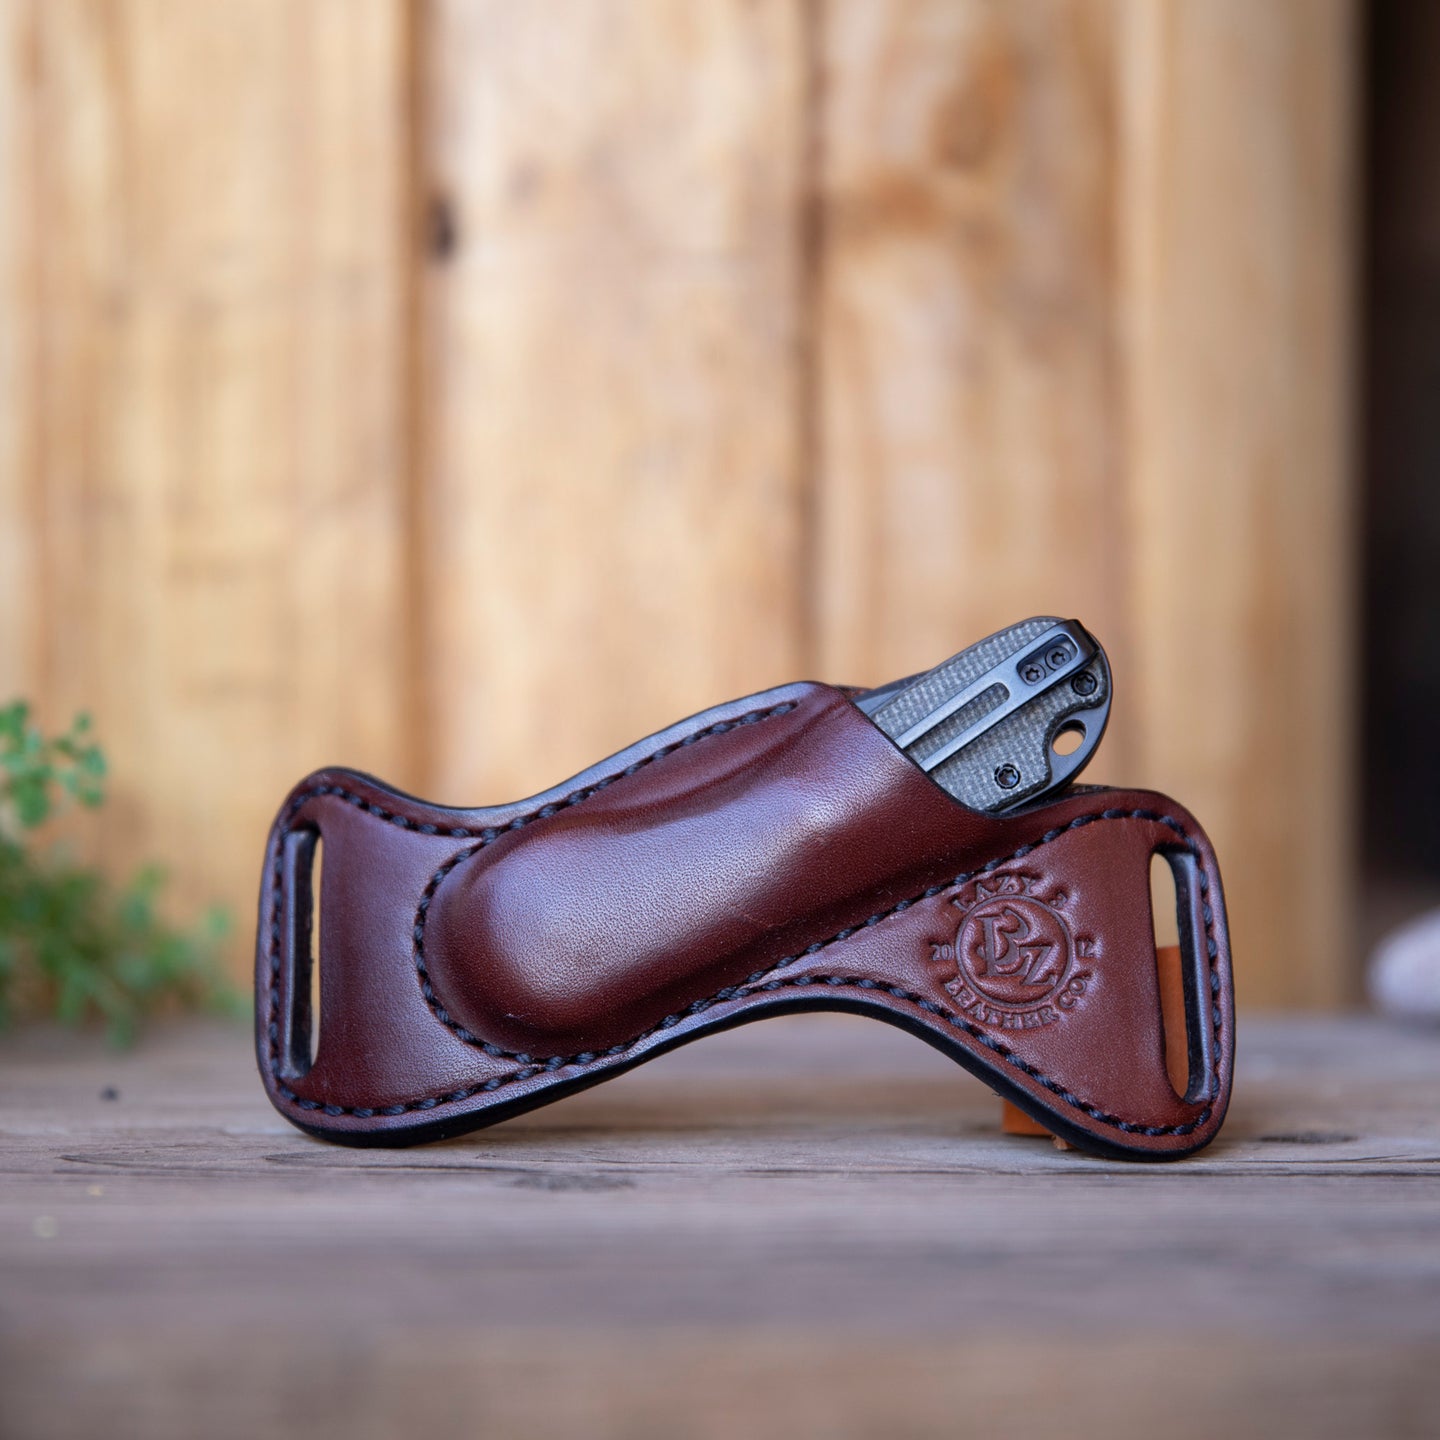 Civivi Elementum with Leather Bishops Scout Carry Sheath